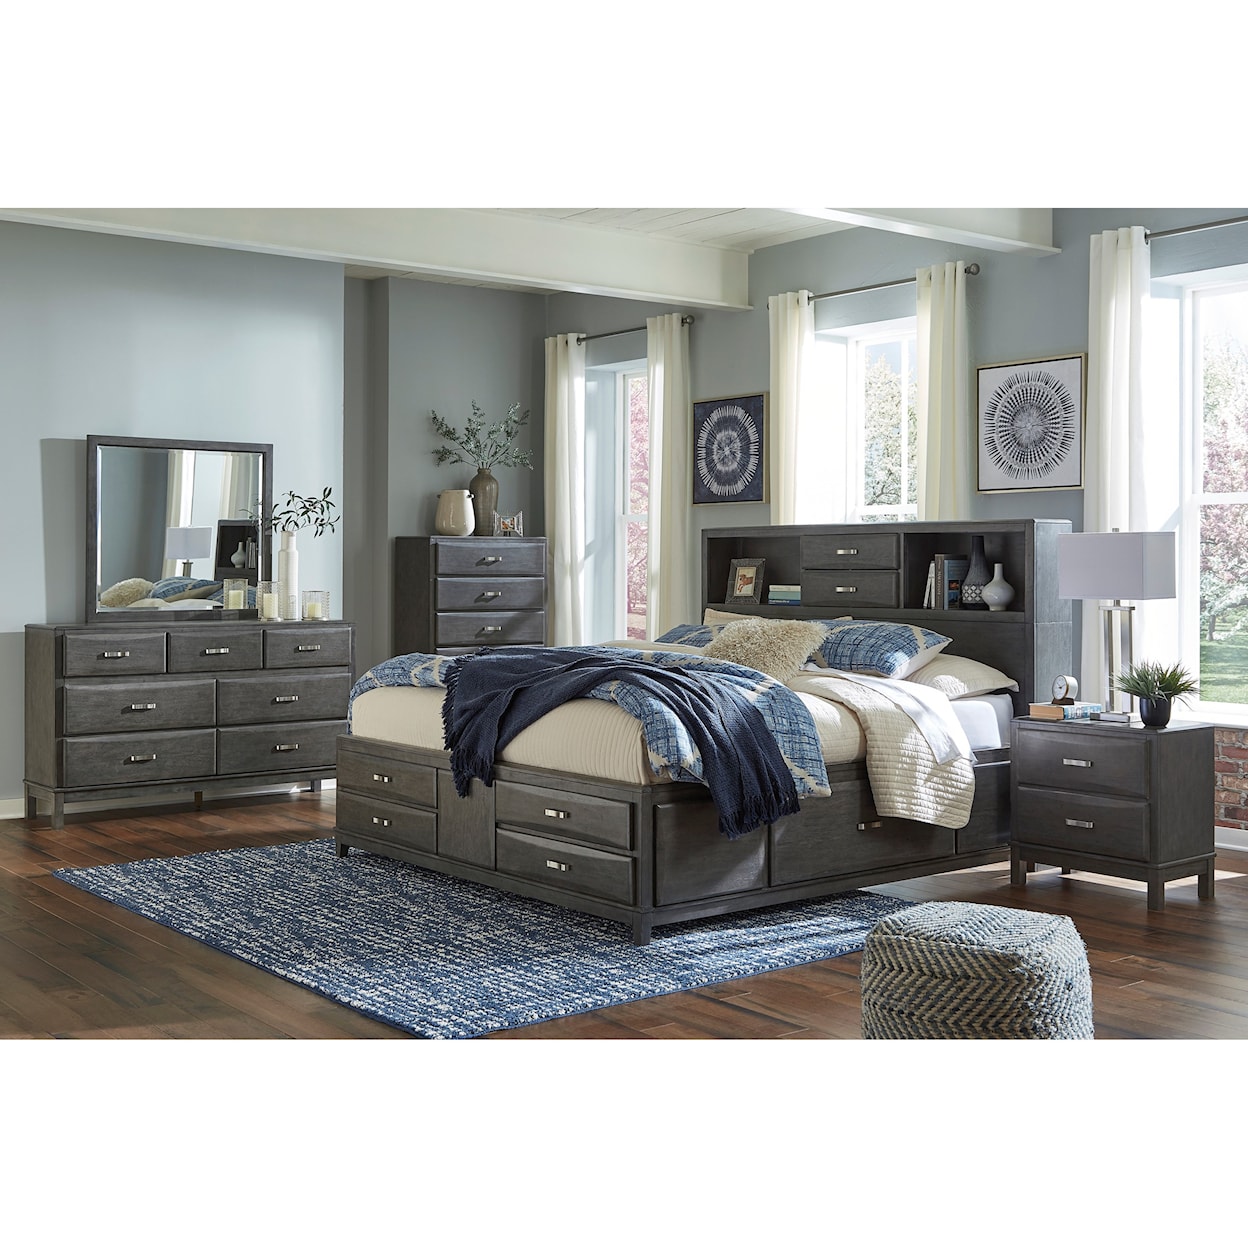 Signature Design by Ashley Caitbrook 7PC Queen Bedroom Group